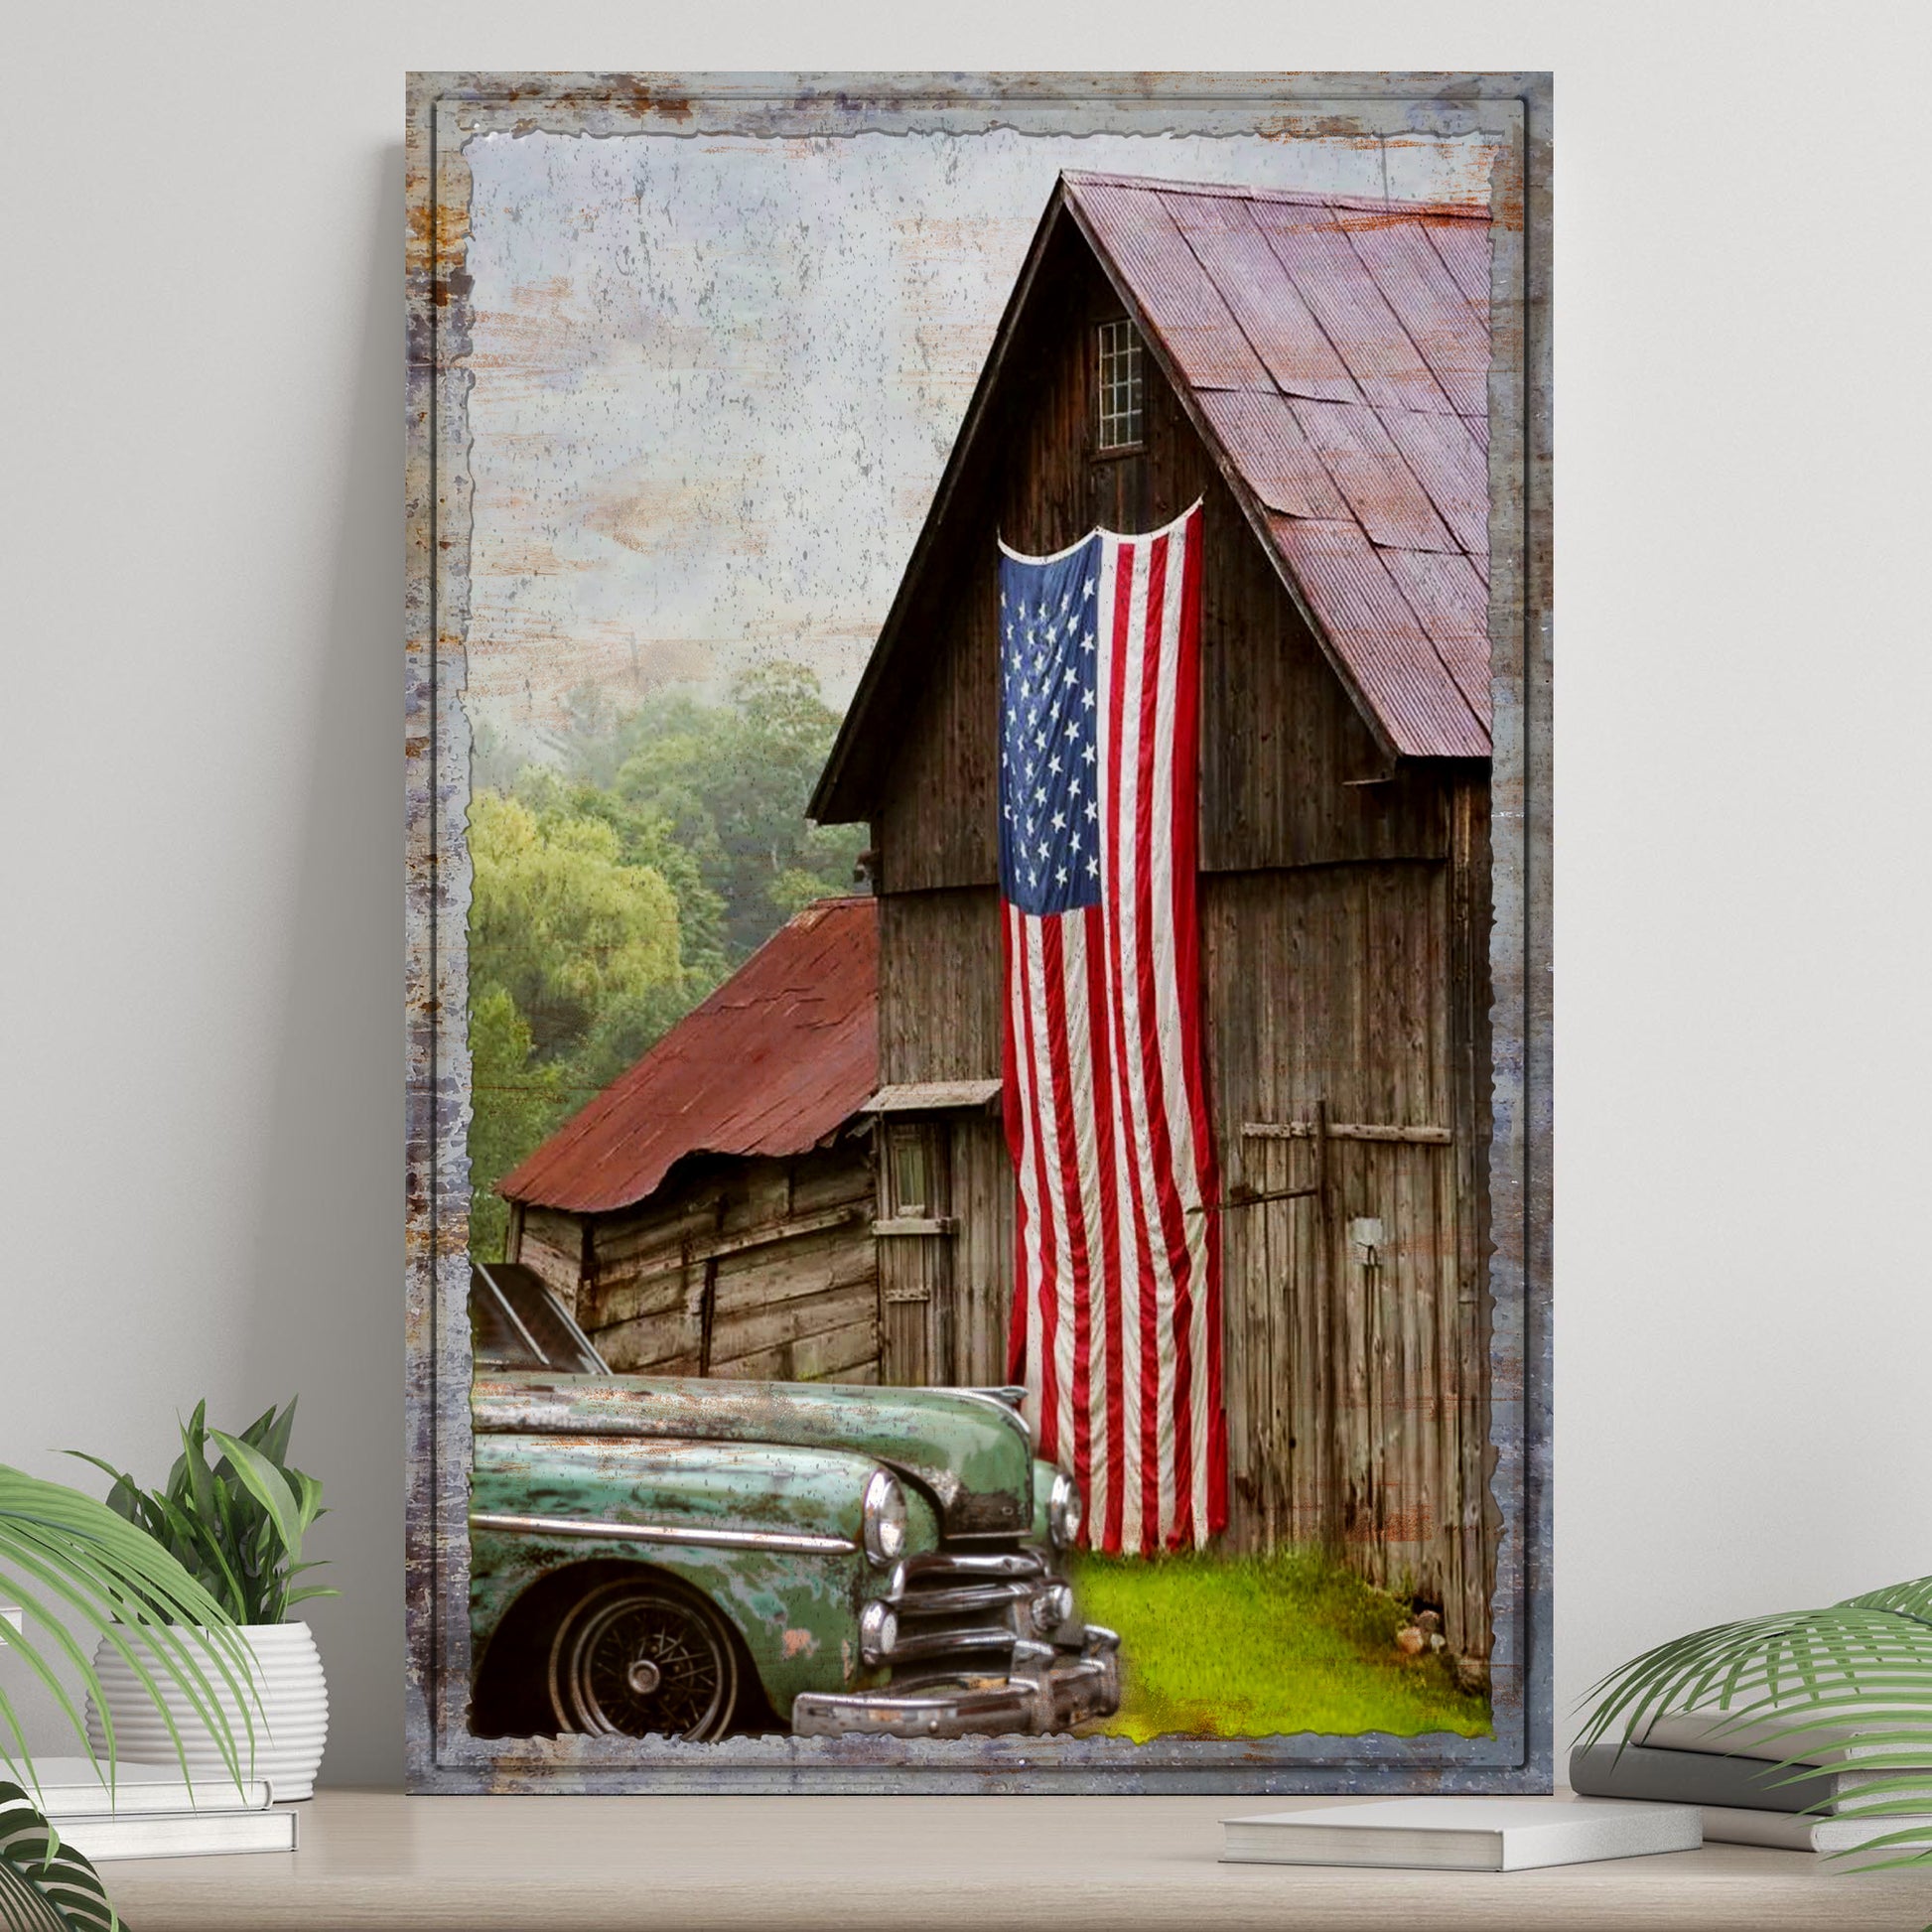 America Country Barn Canvas Wall Art - Image by Tailored Canvases